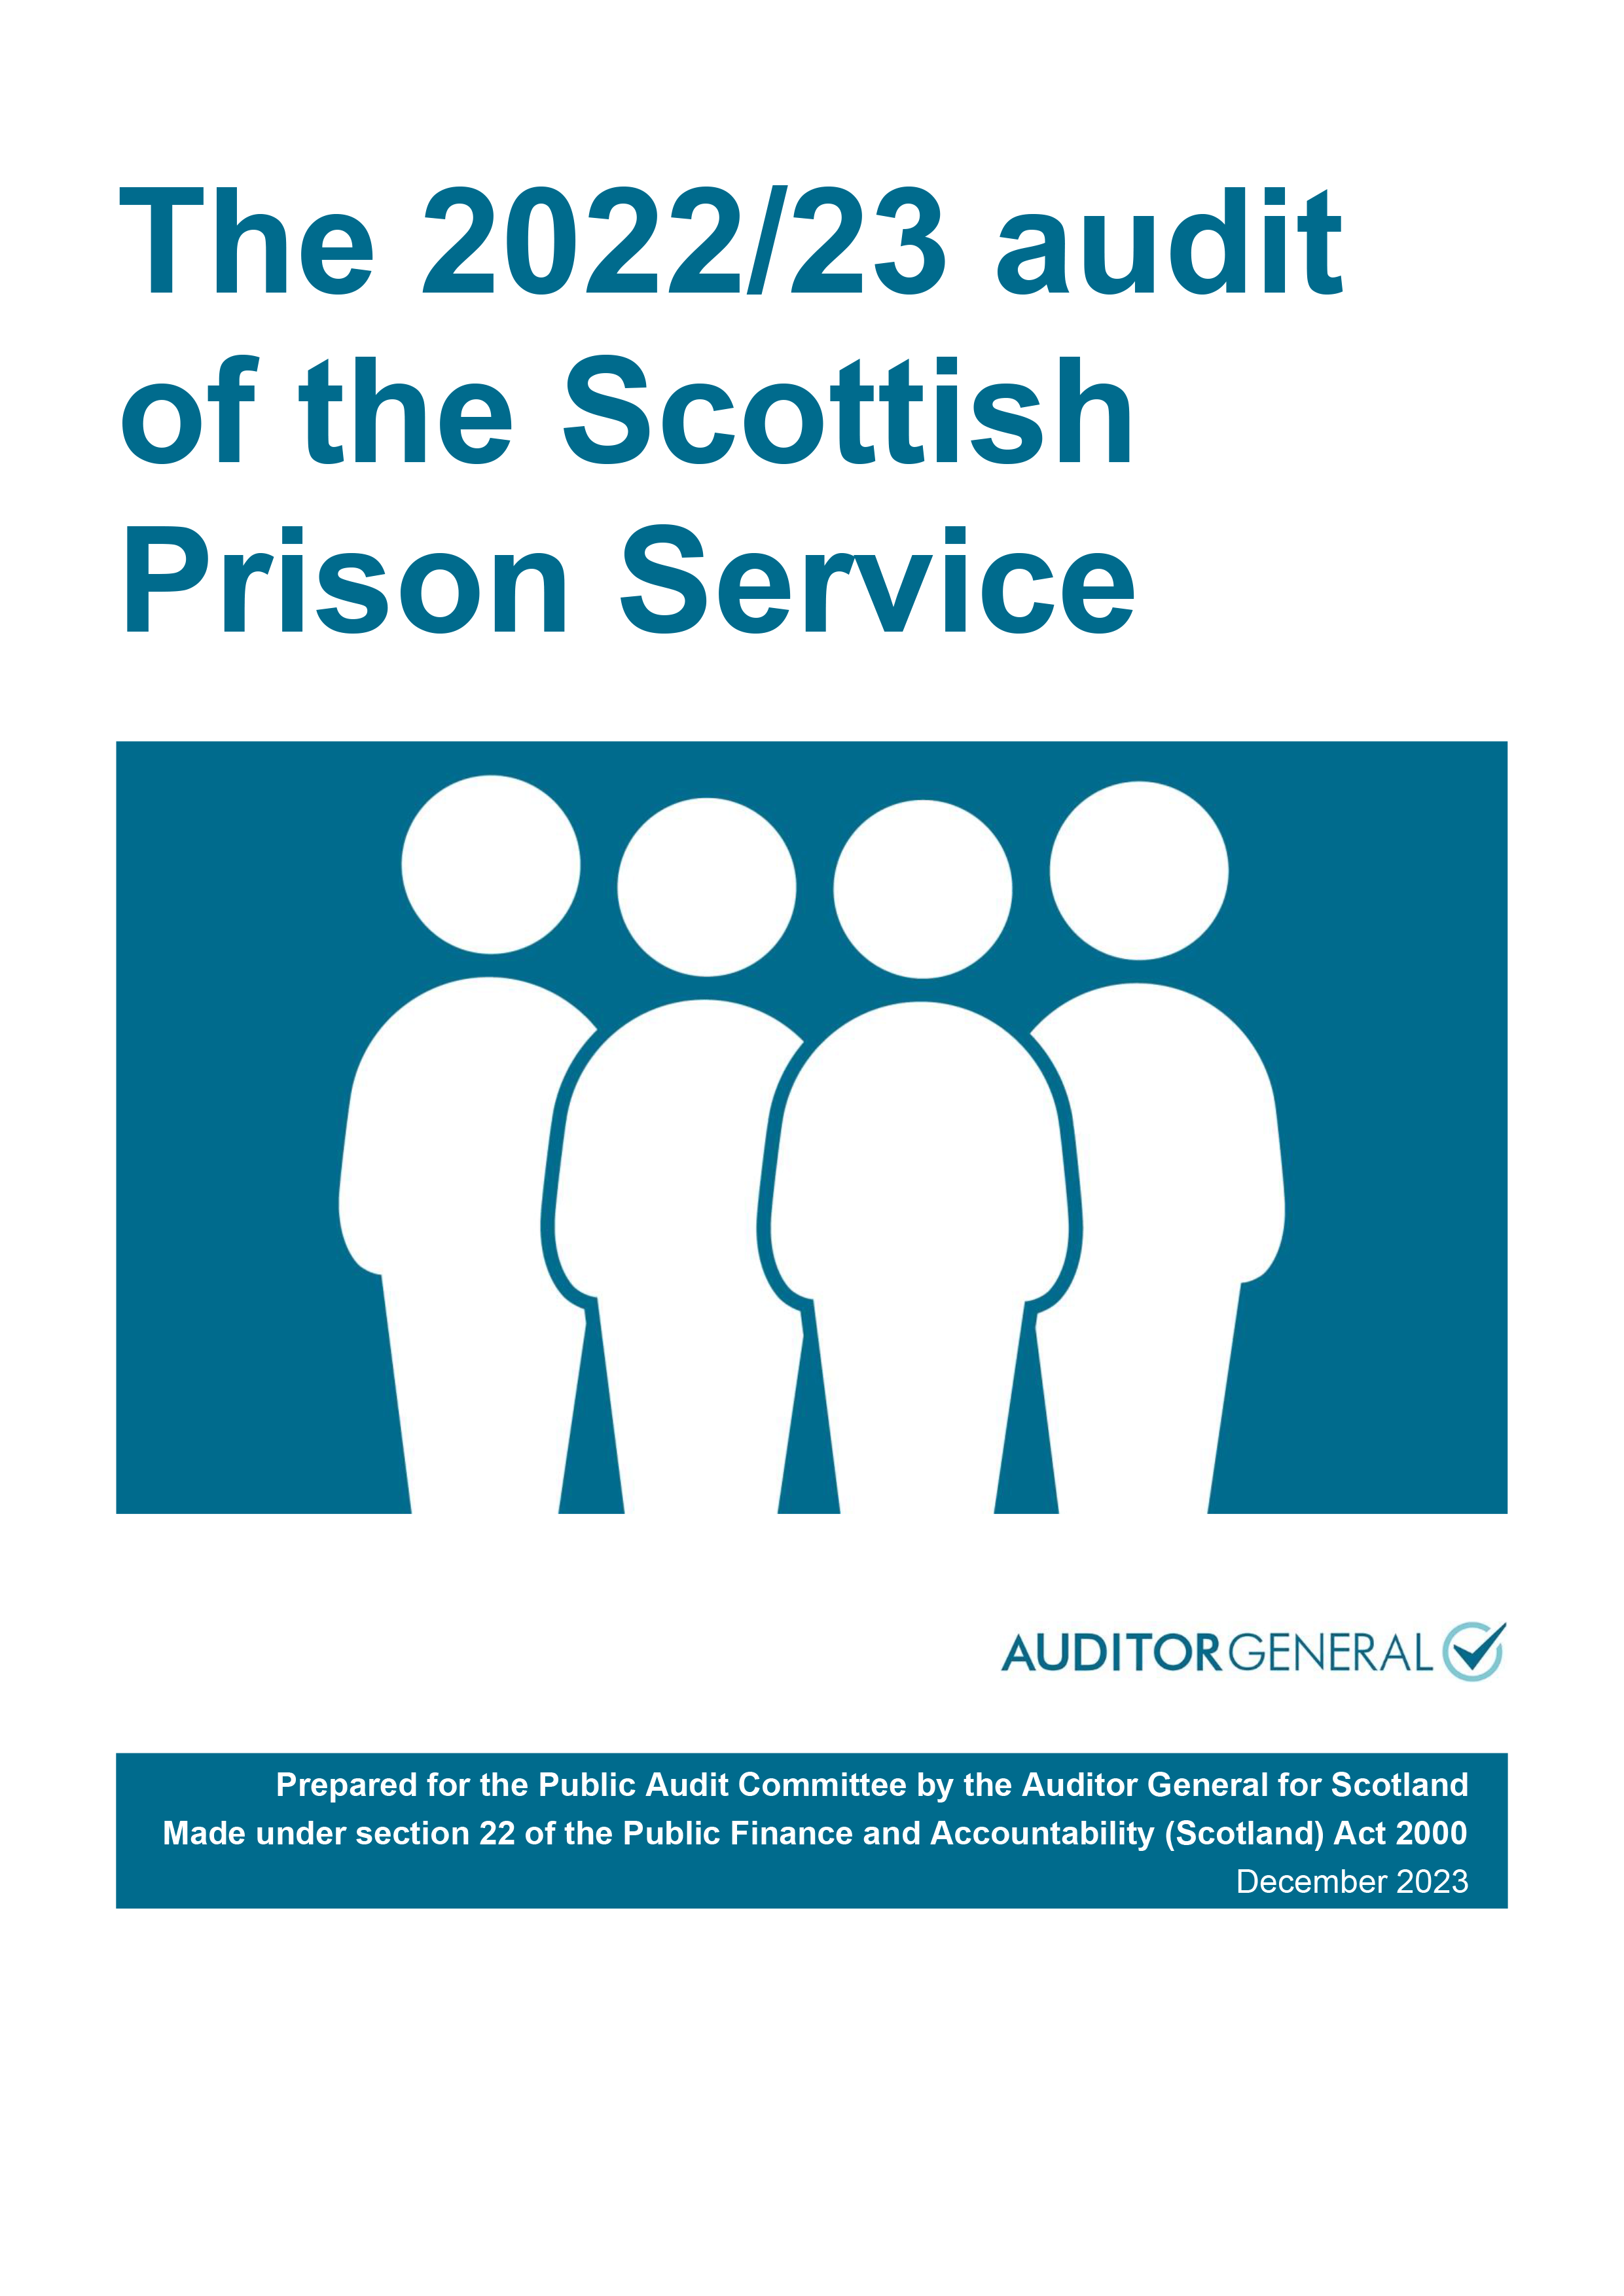 View The 2022/23 audit of the Scottish Prison Service